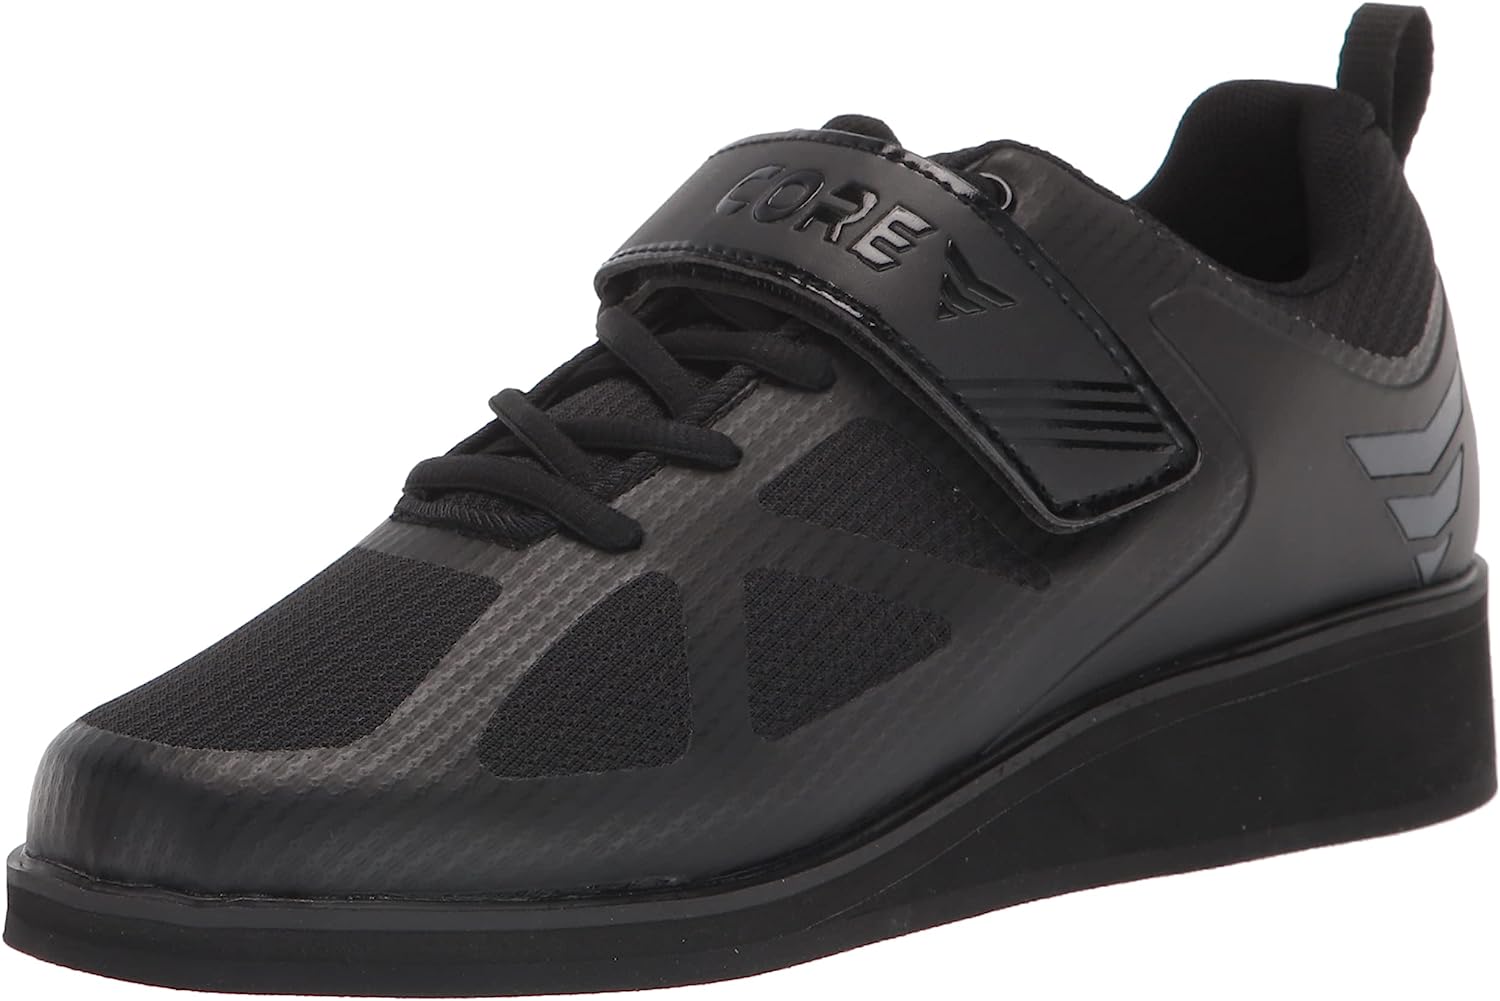 Core Weightlifting Shoes - Squat Shoes for Men and [...]